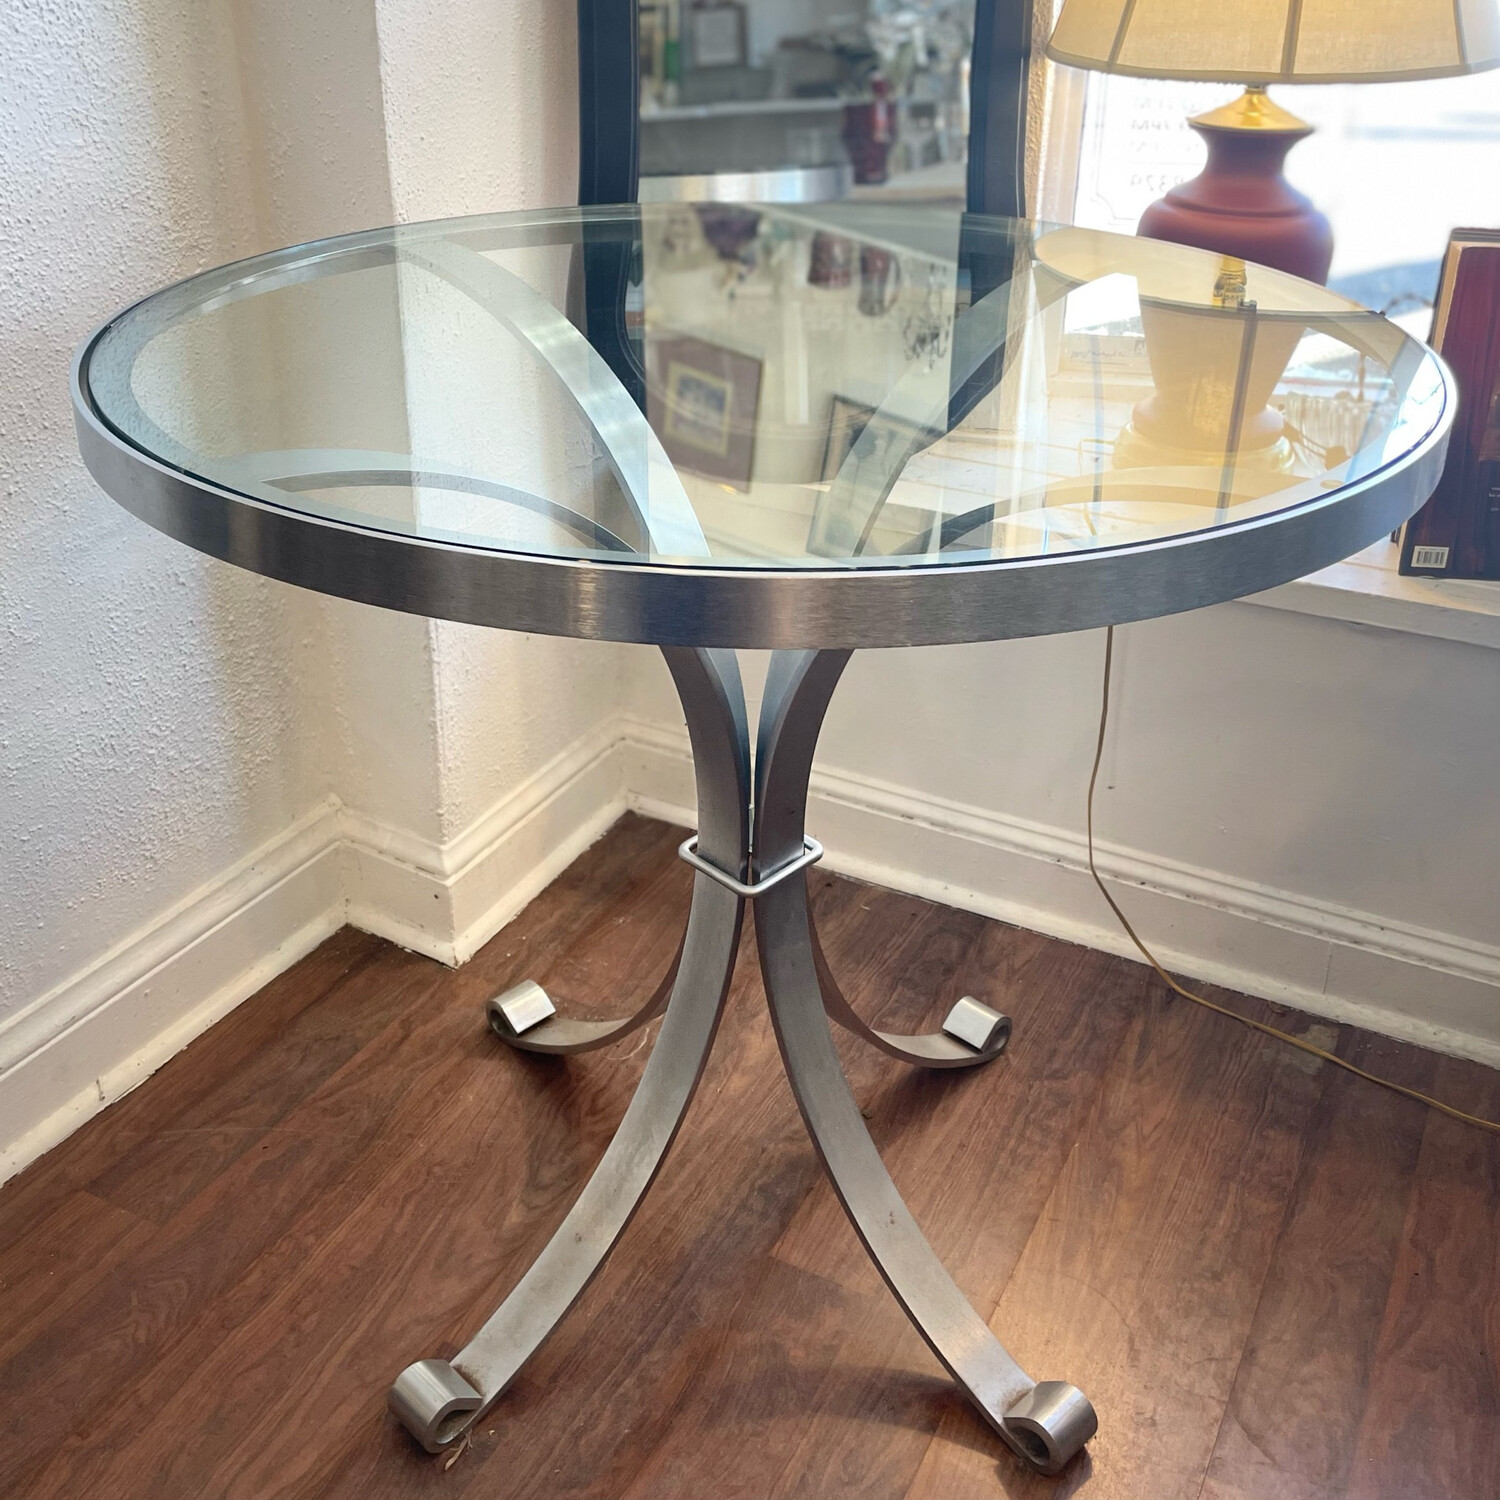 36” Round Commercial Grade Glass and Steel Table 